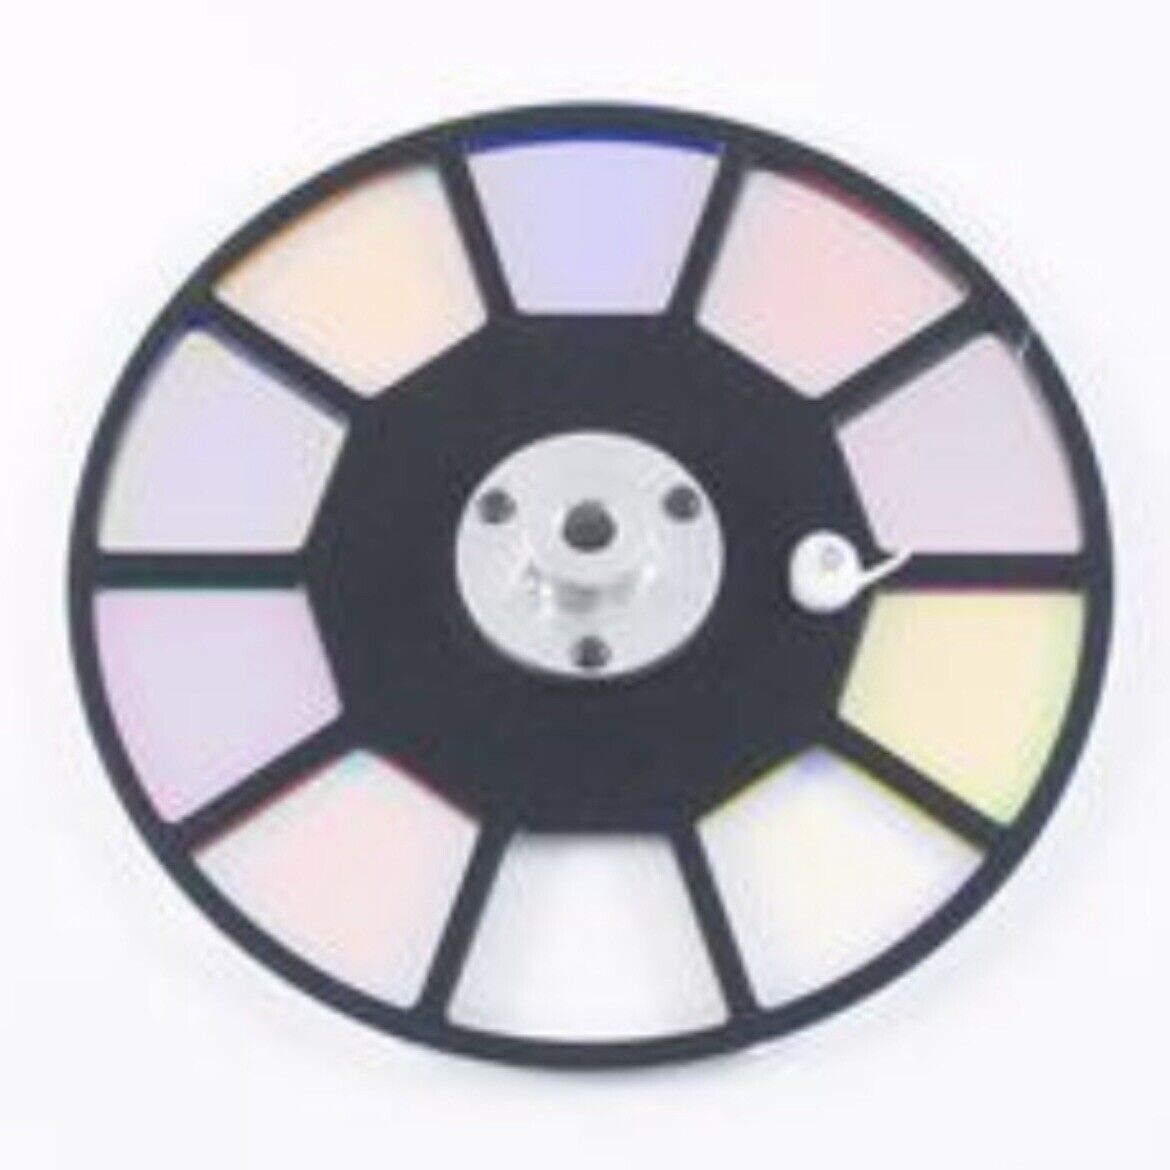 Color Wheel For Chauvet Intimidator Spot Led 150 Replacement Part Parts Used